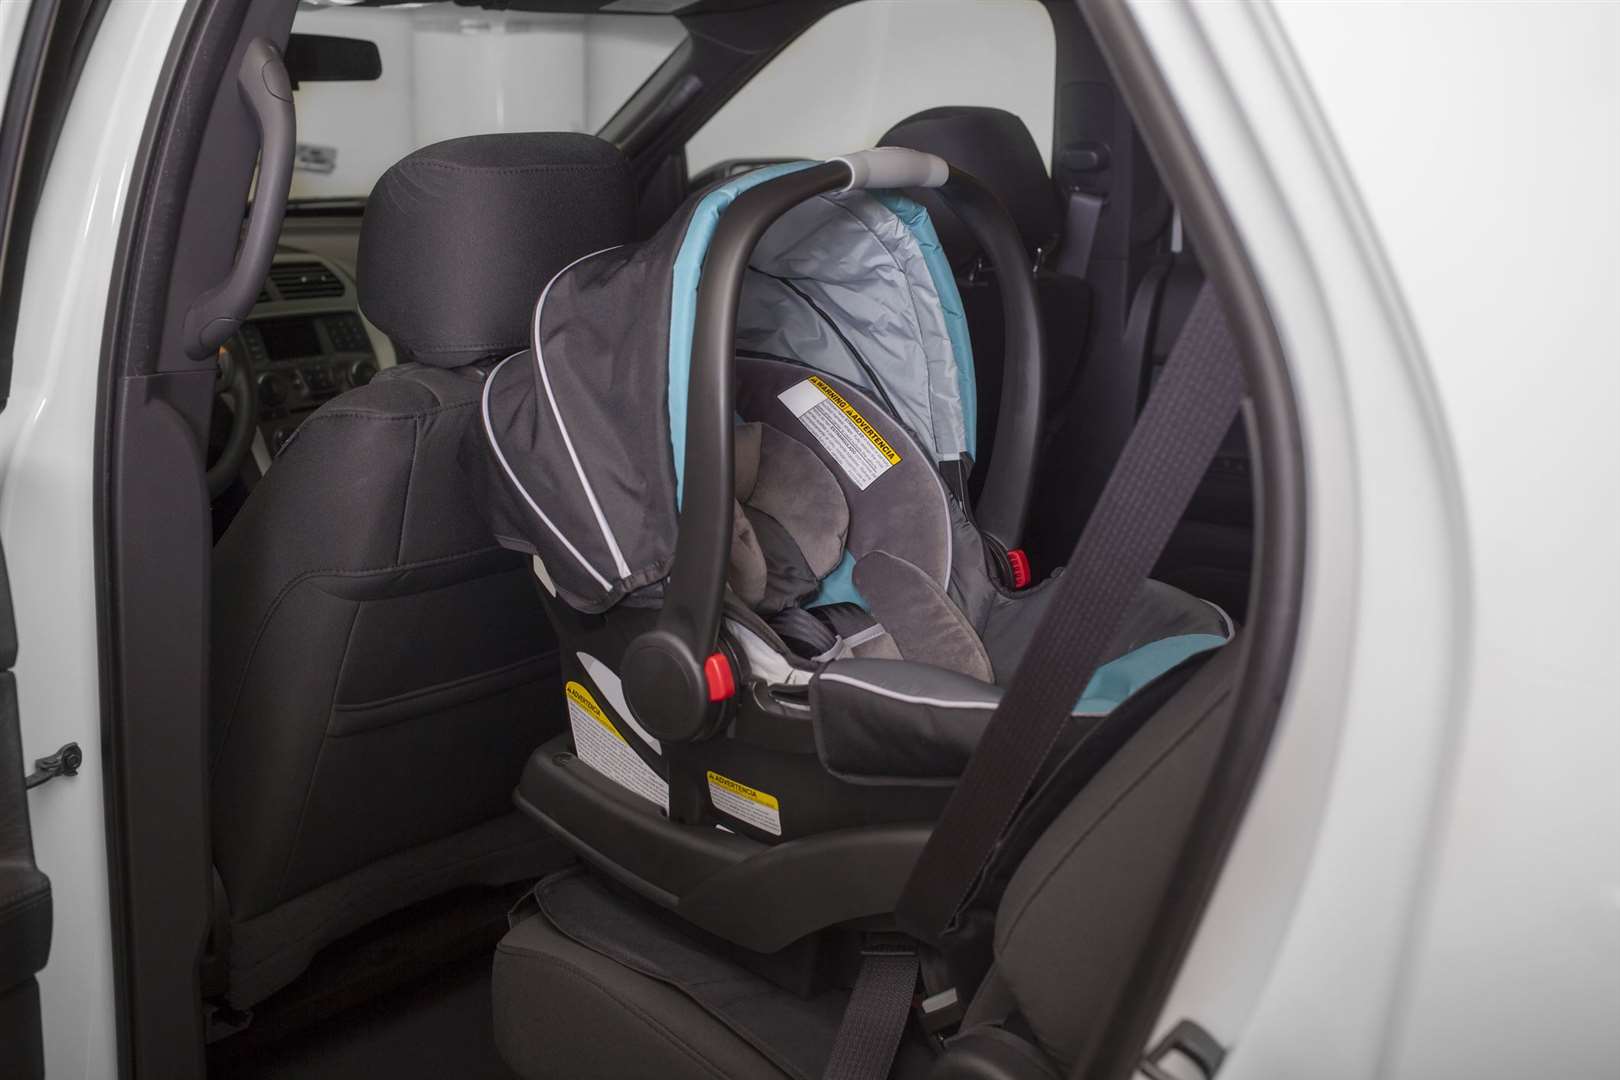 When Sharp placed the baby in her car, she drove dangerously without ensuring the baby was safely strapped in. Stock picture